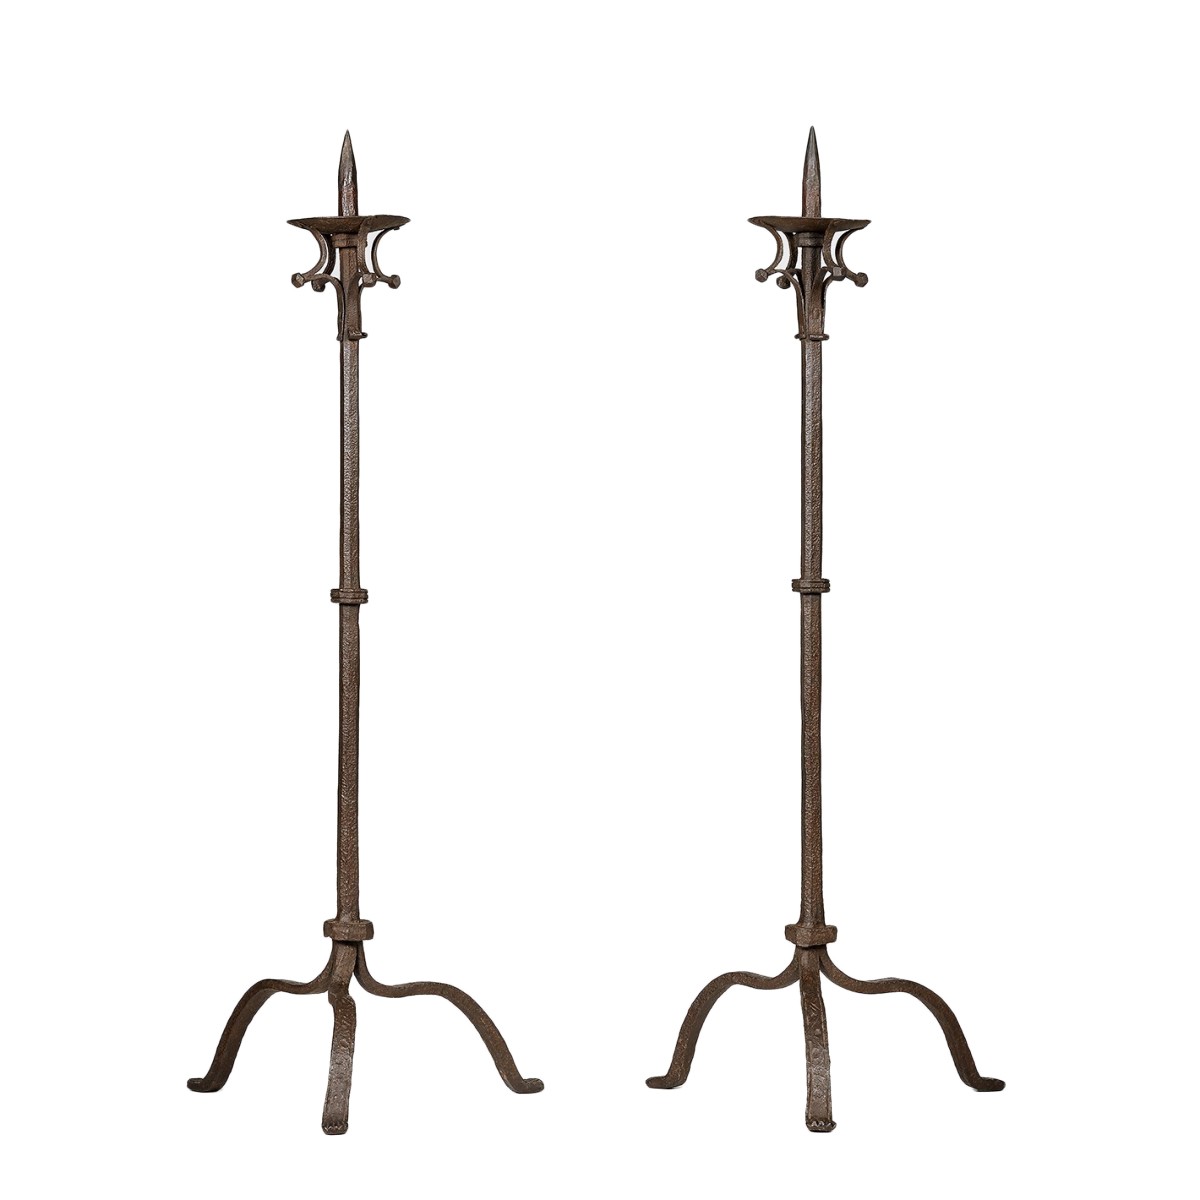 A Pair of Gothic Pricket Candlesticks - Ref.95405